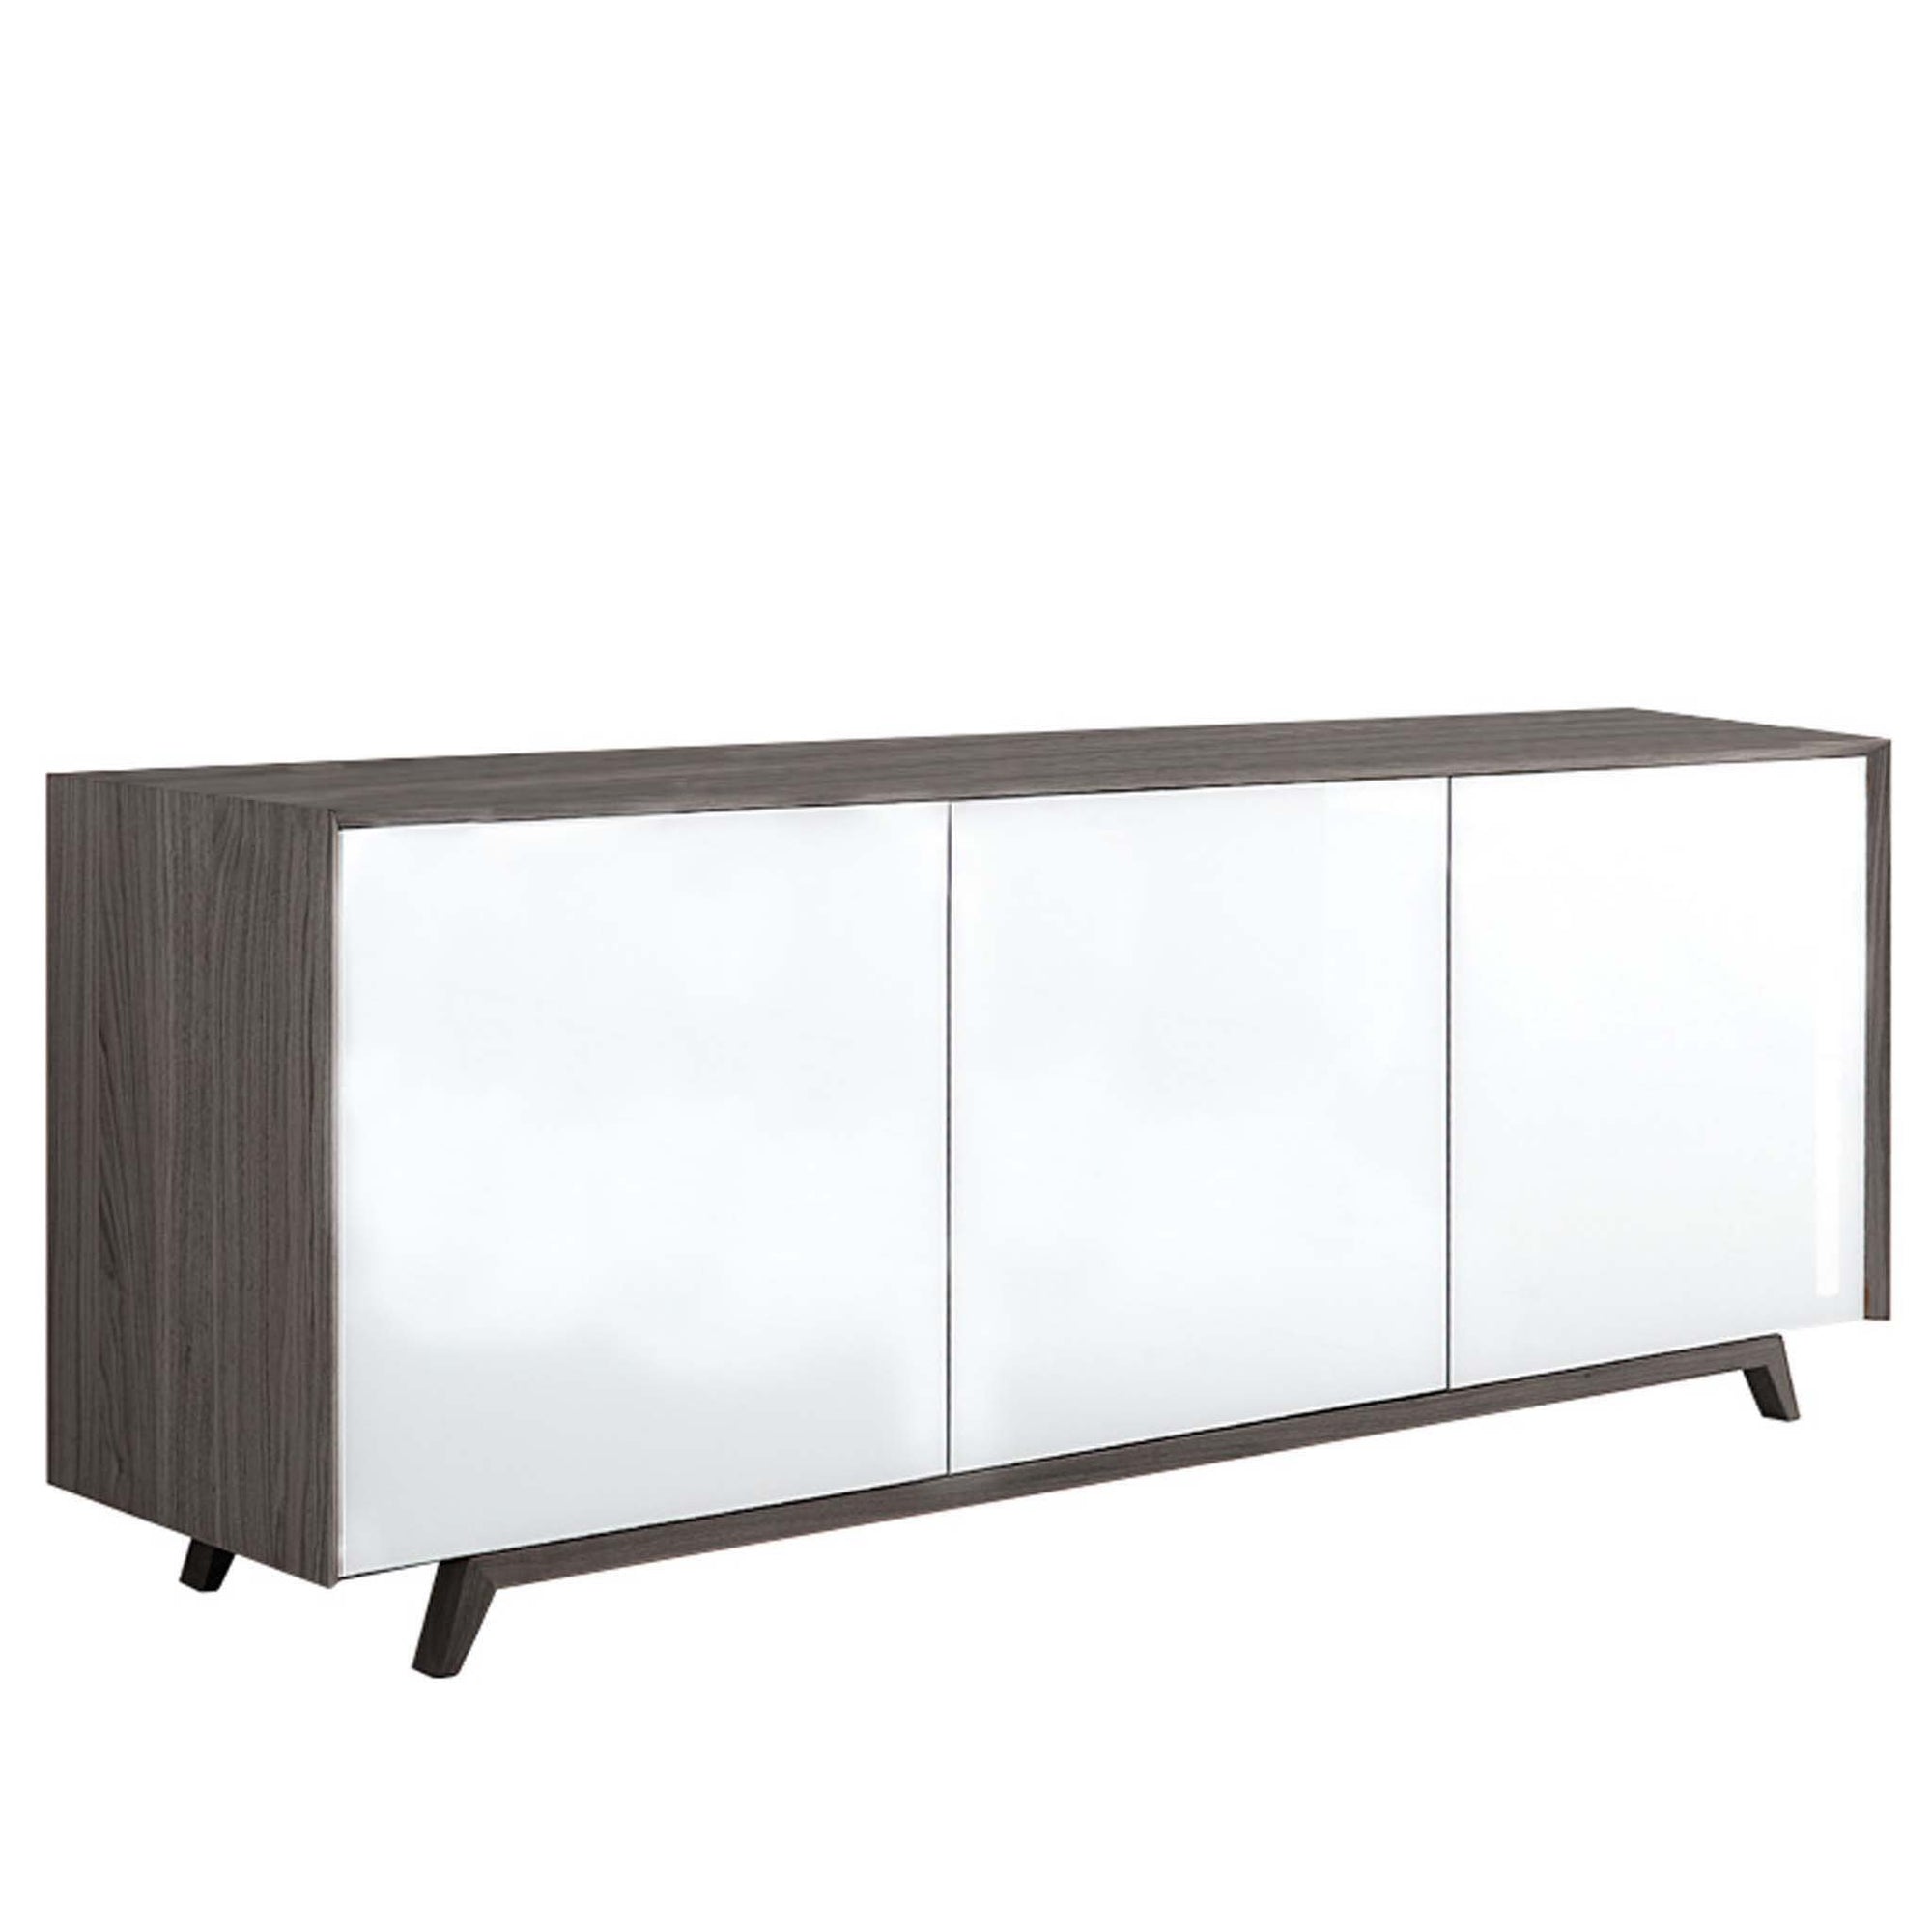 Bellini-Tischlein Ash Sideboard with Glass Doors-Sideboards & Buffets-MODTEMPO